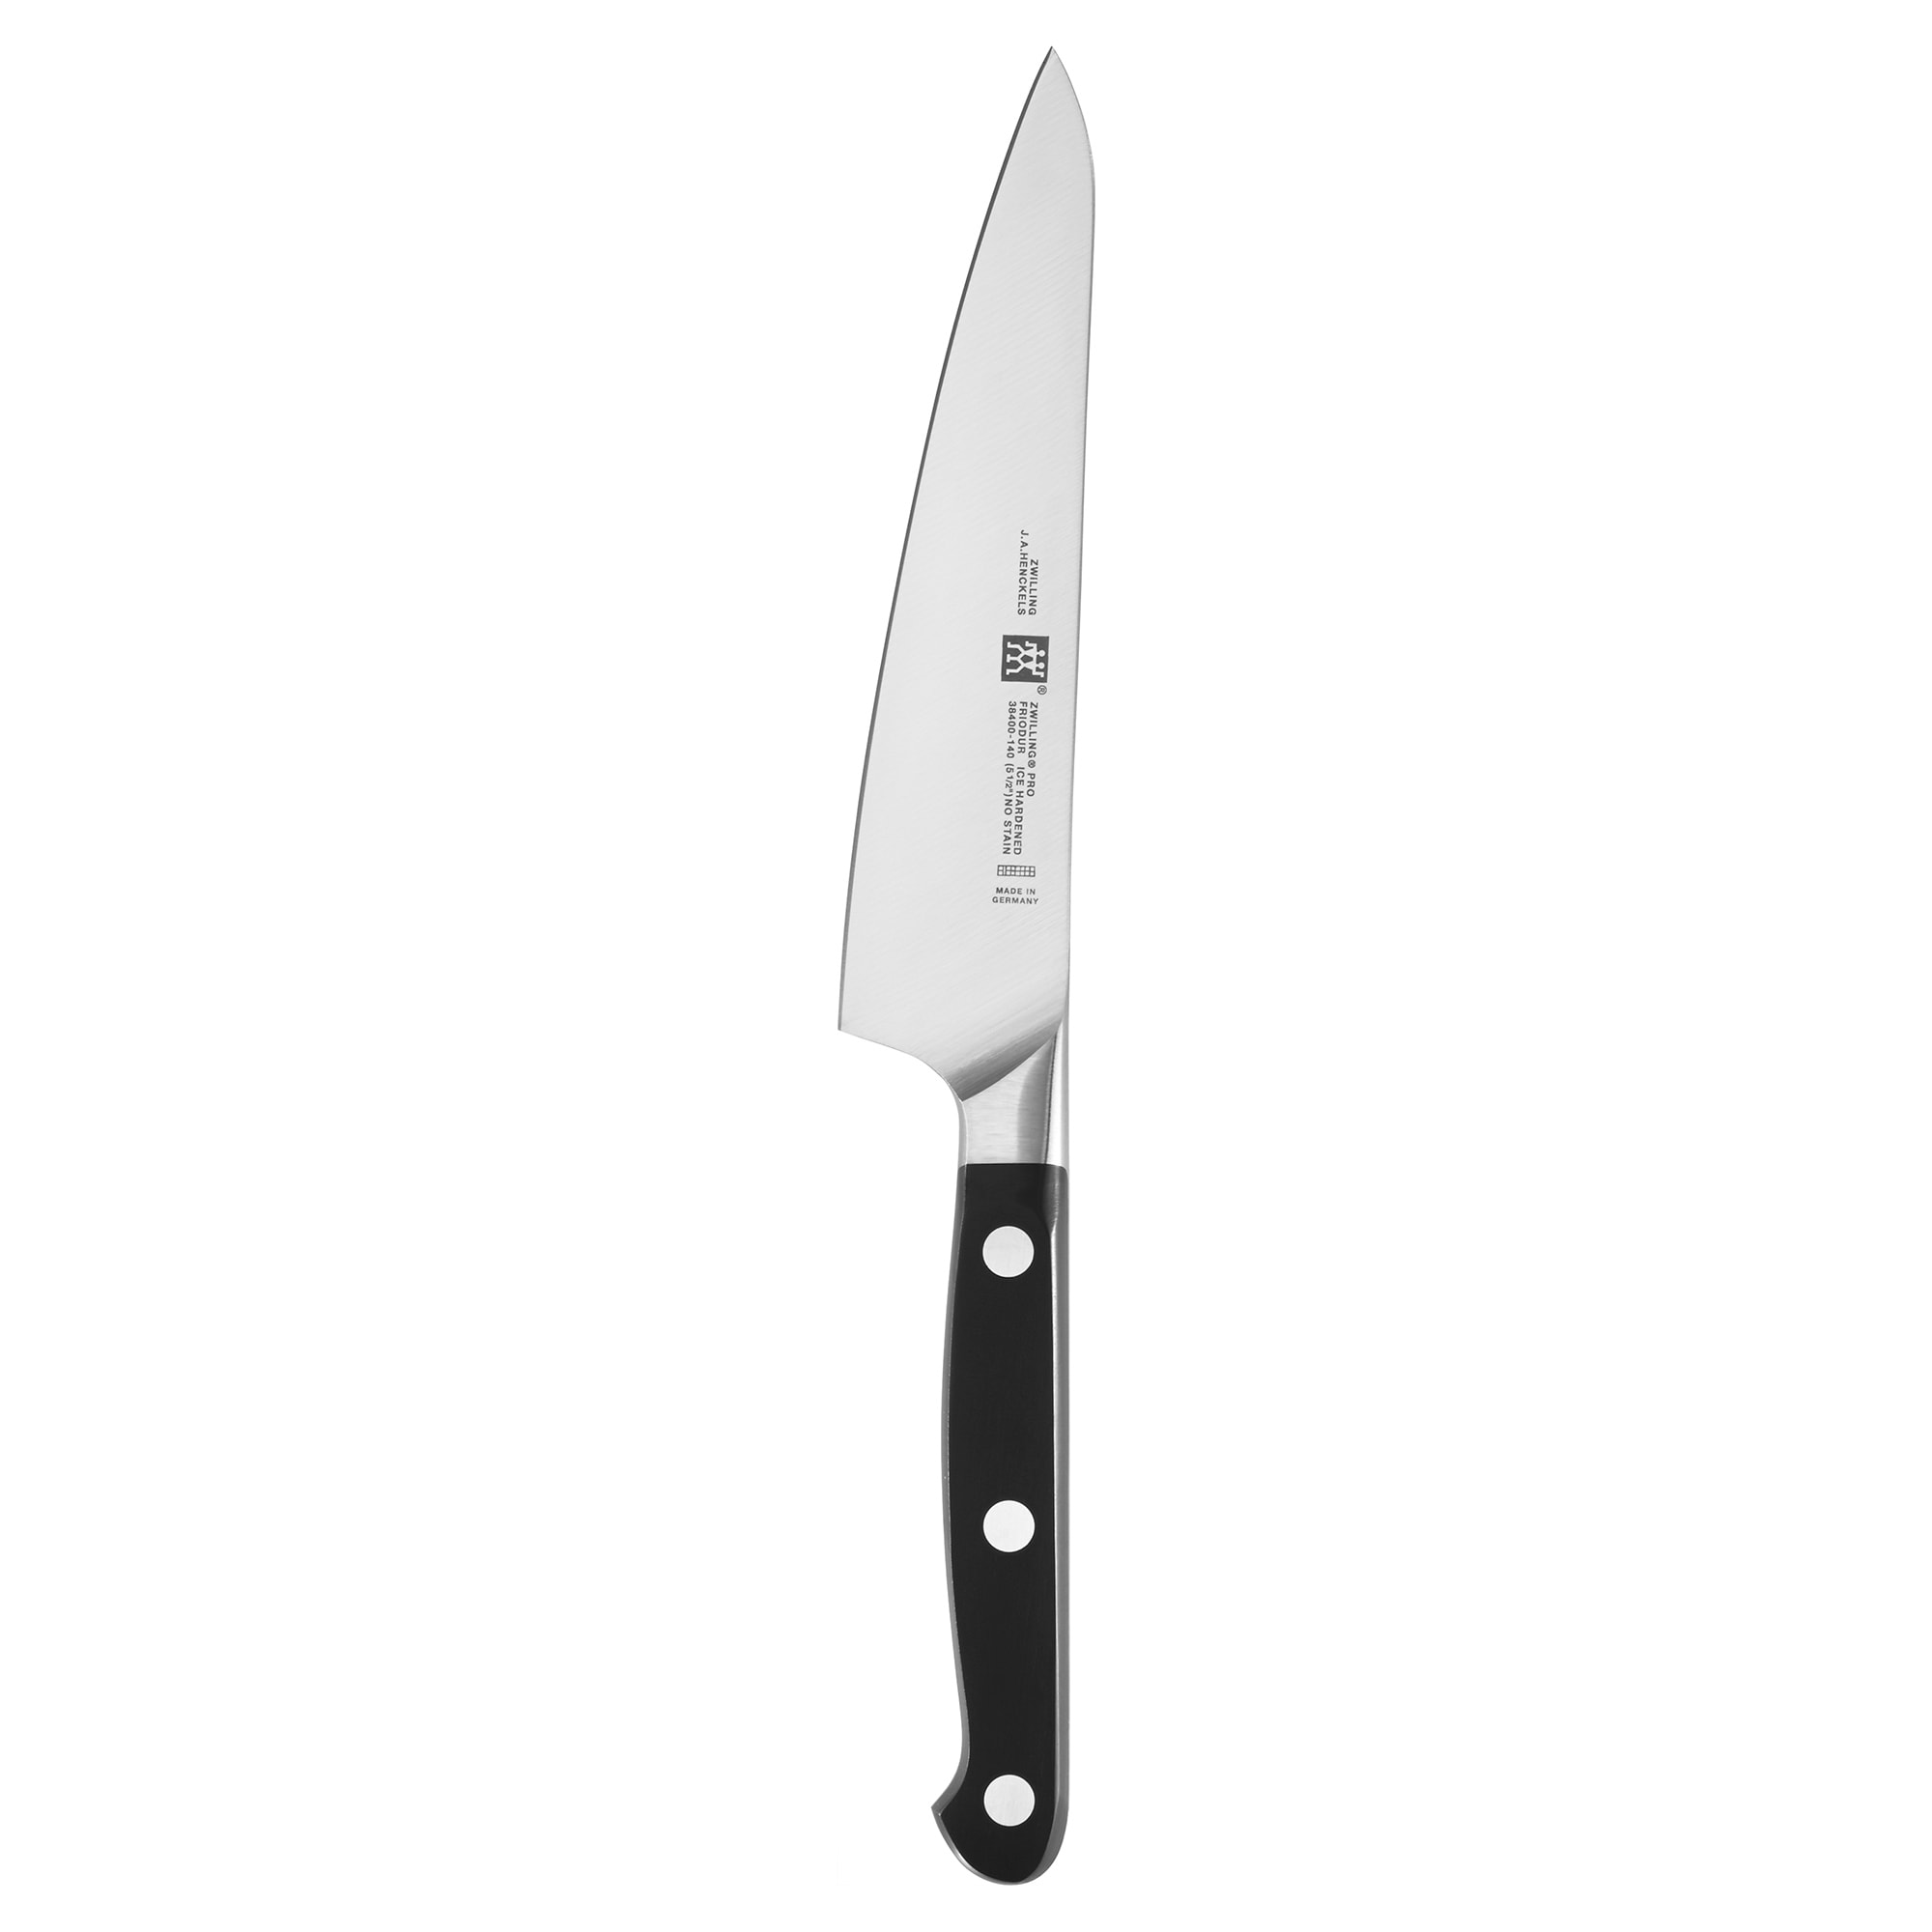 Zwilling Professional S Chef's Knife, 8, Silver/Black